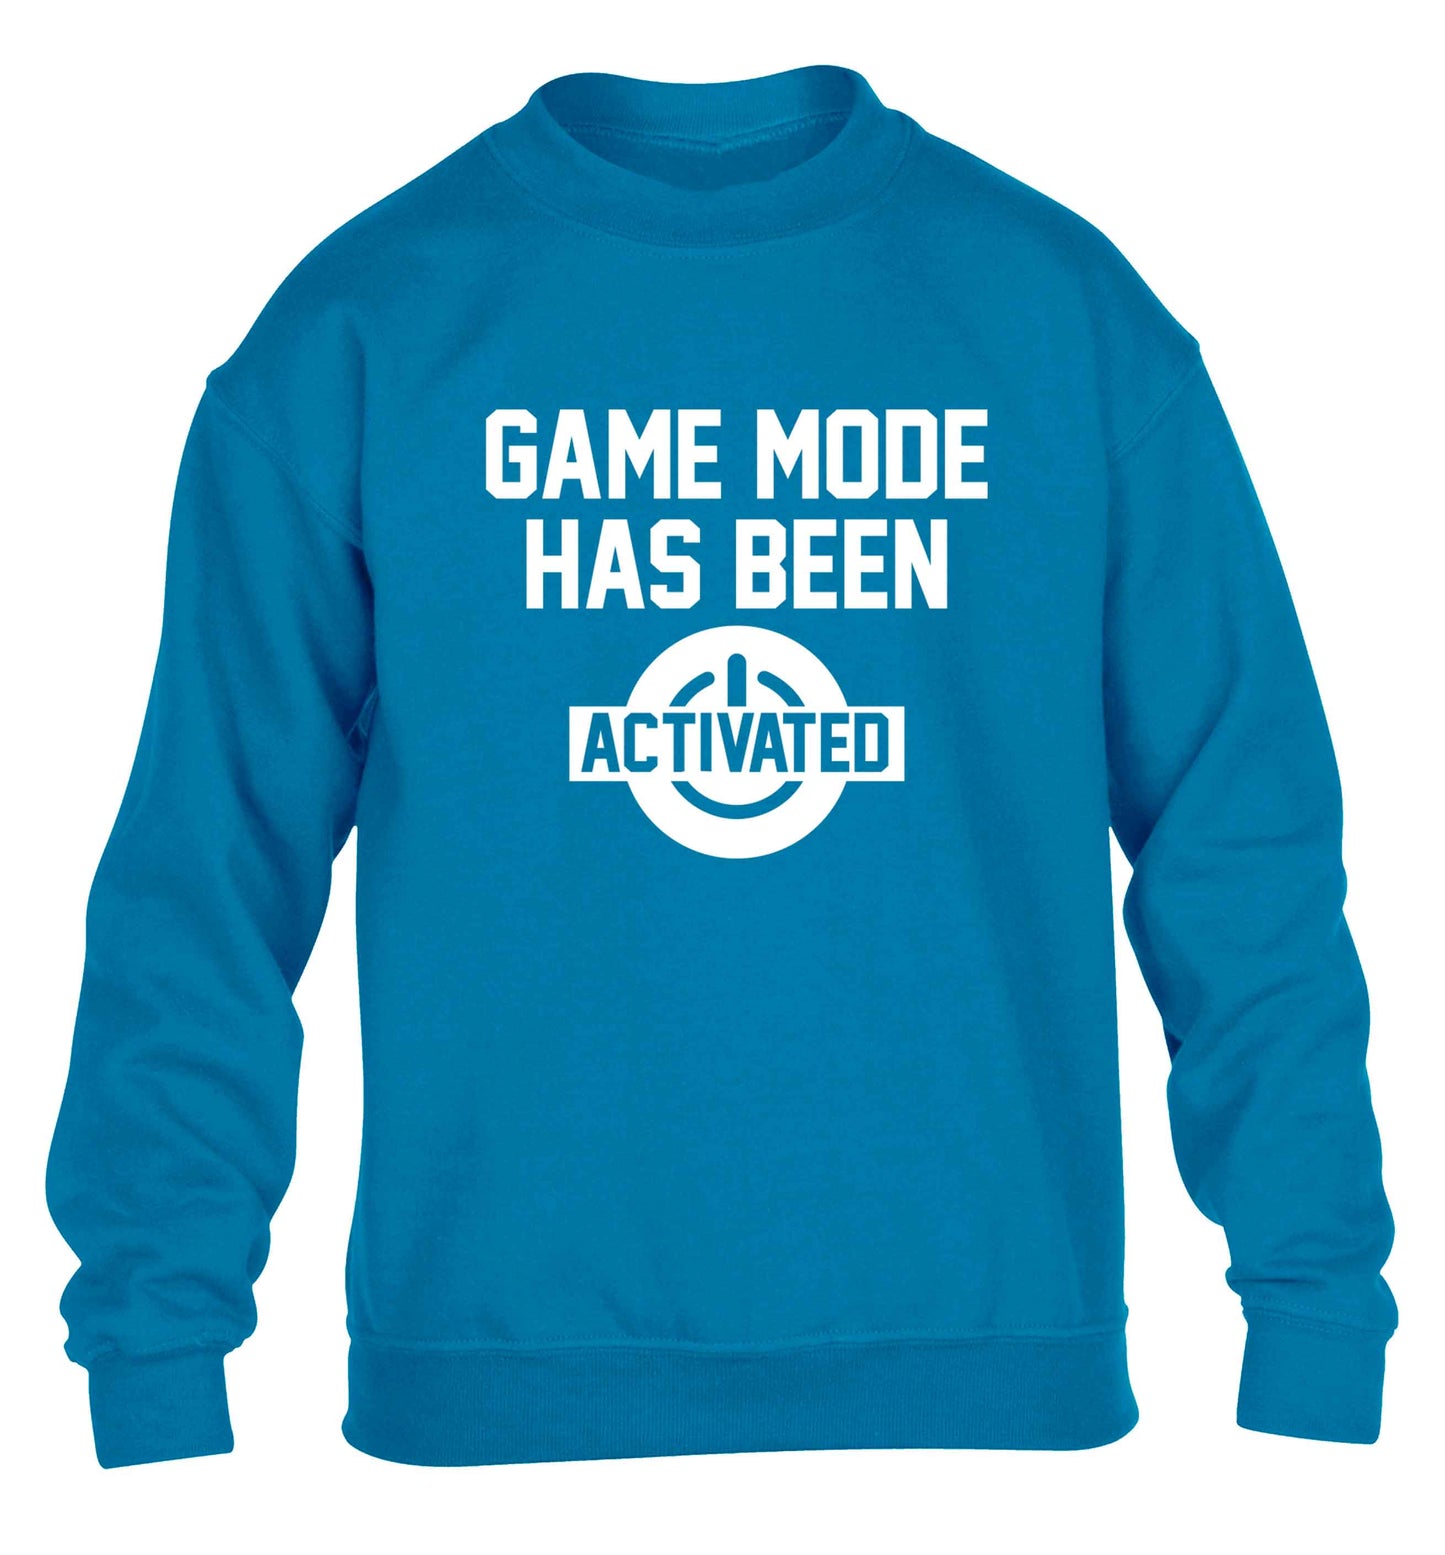 Game mode has been activated children's blue sweater 12-13 Years